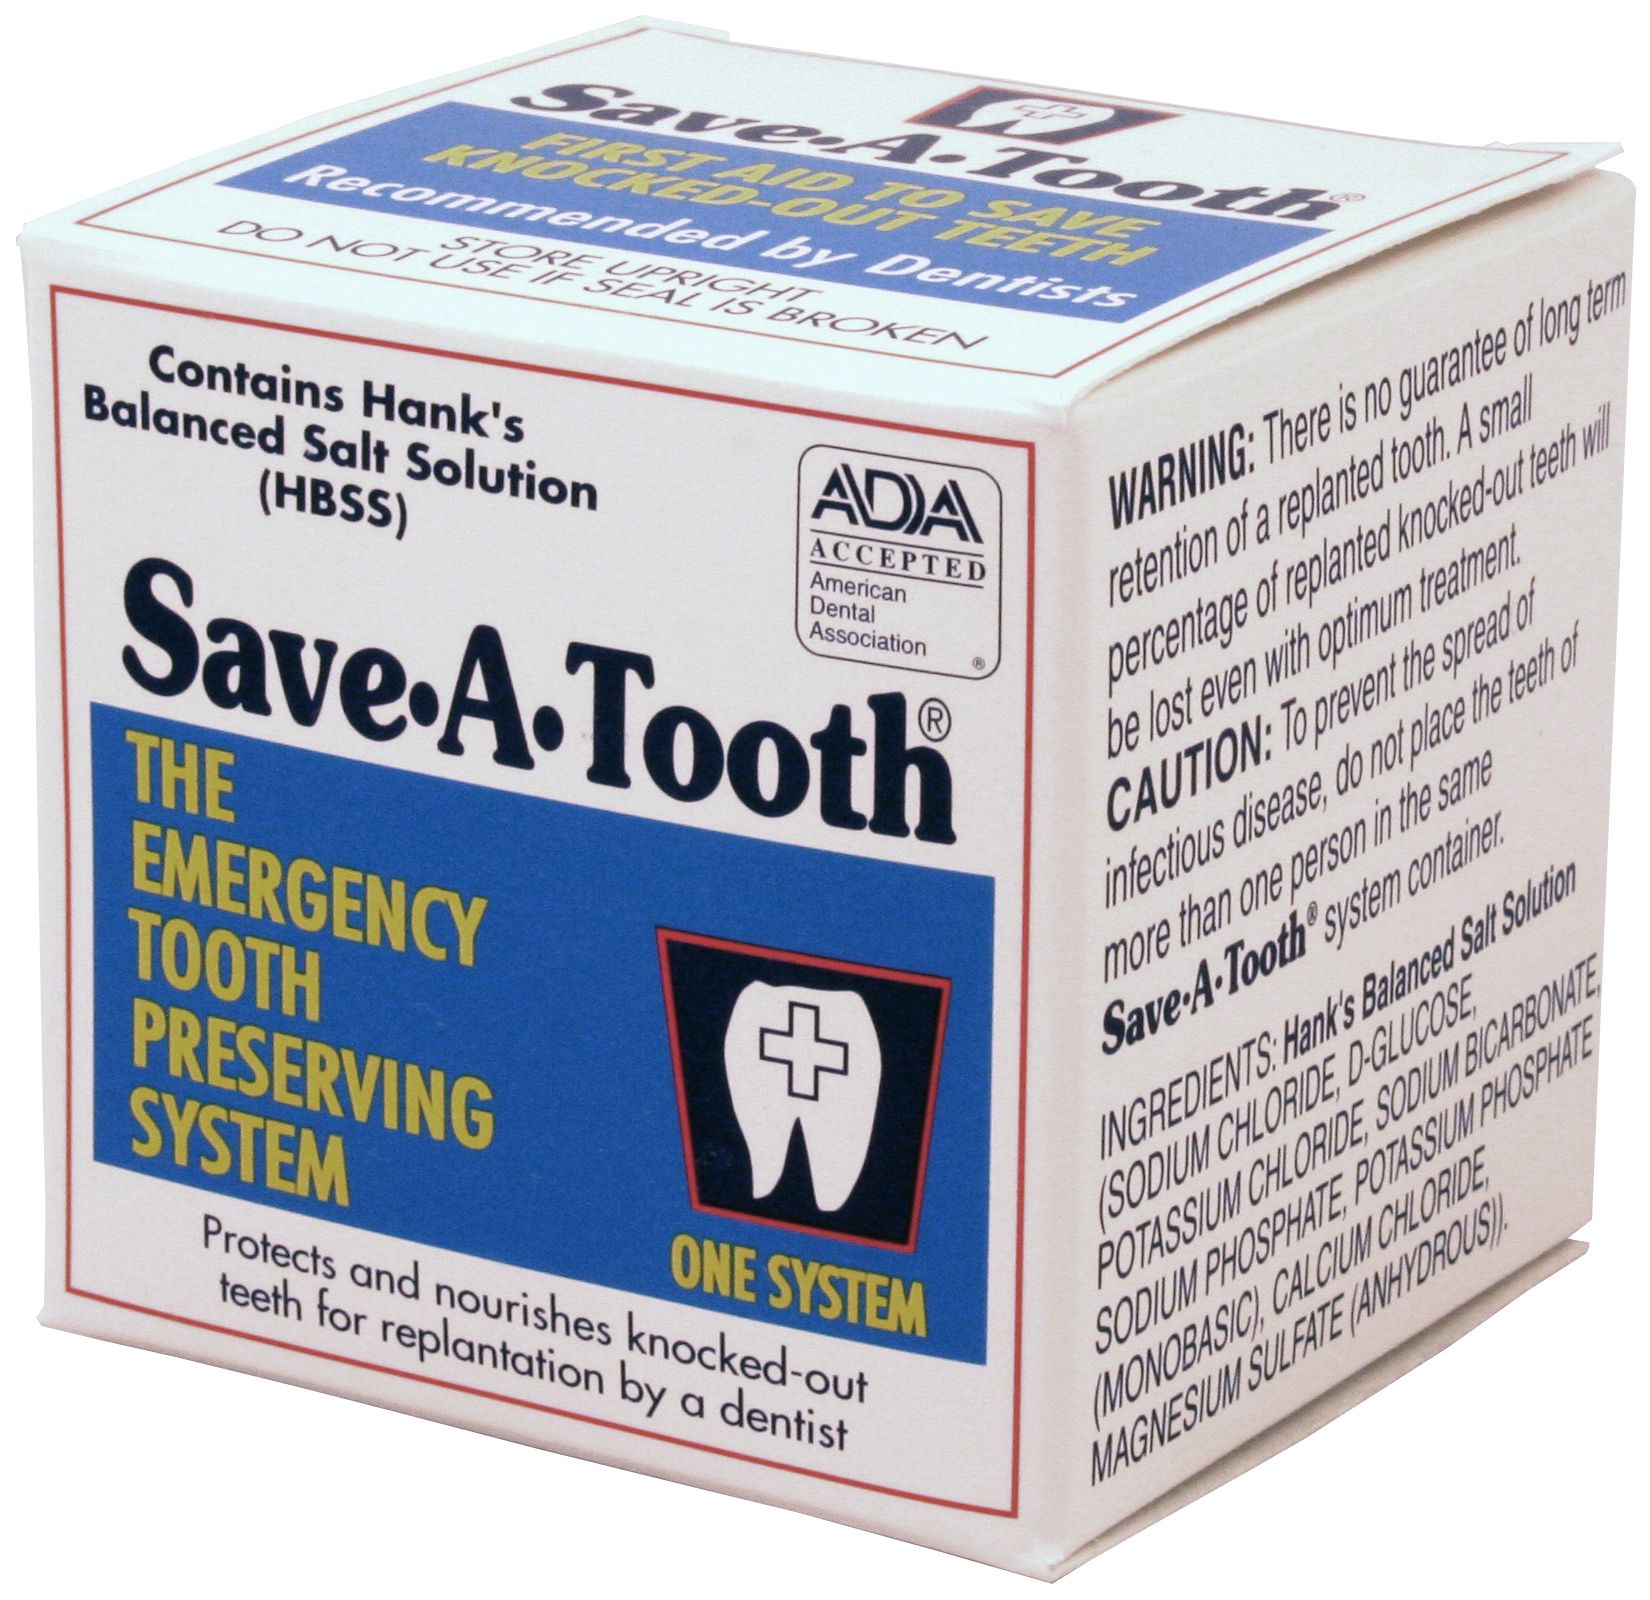 Save-A-Tooth